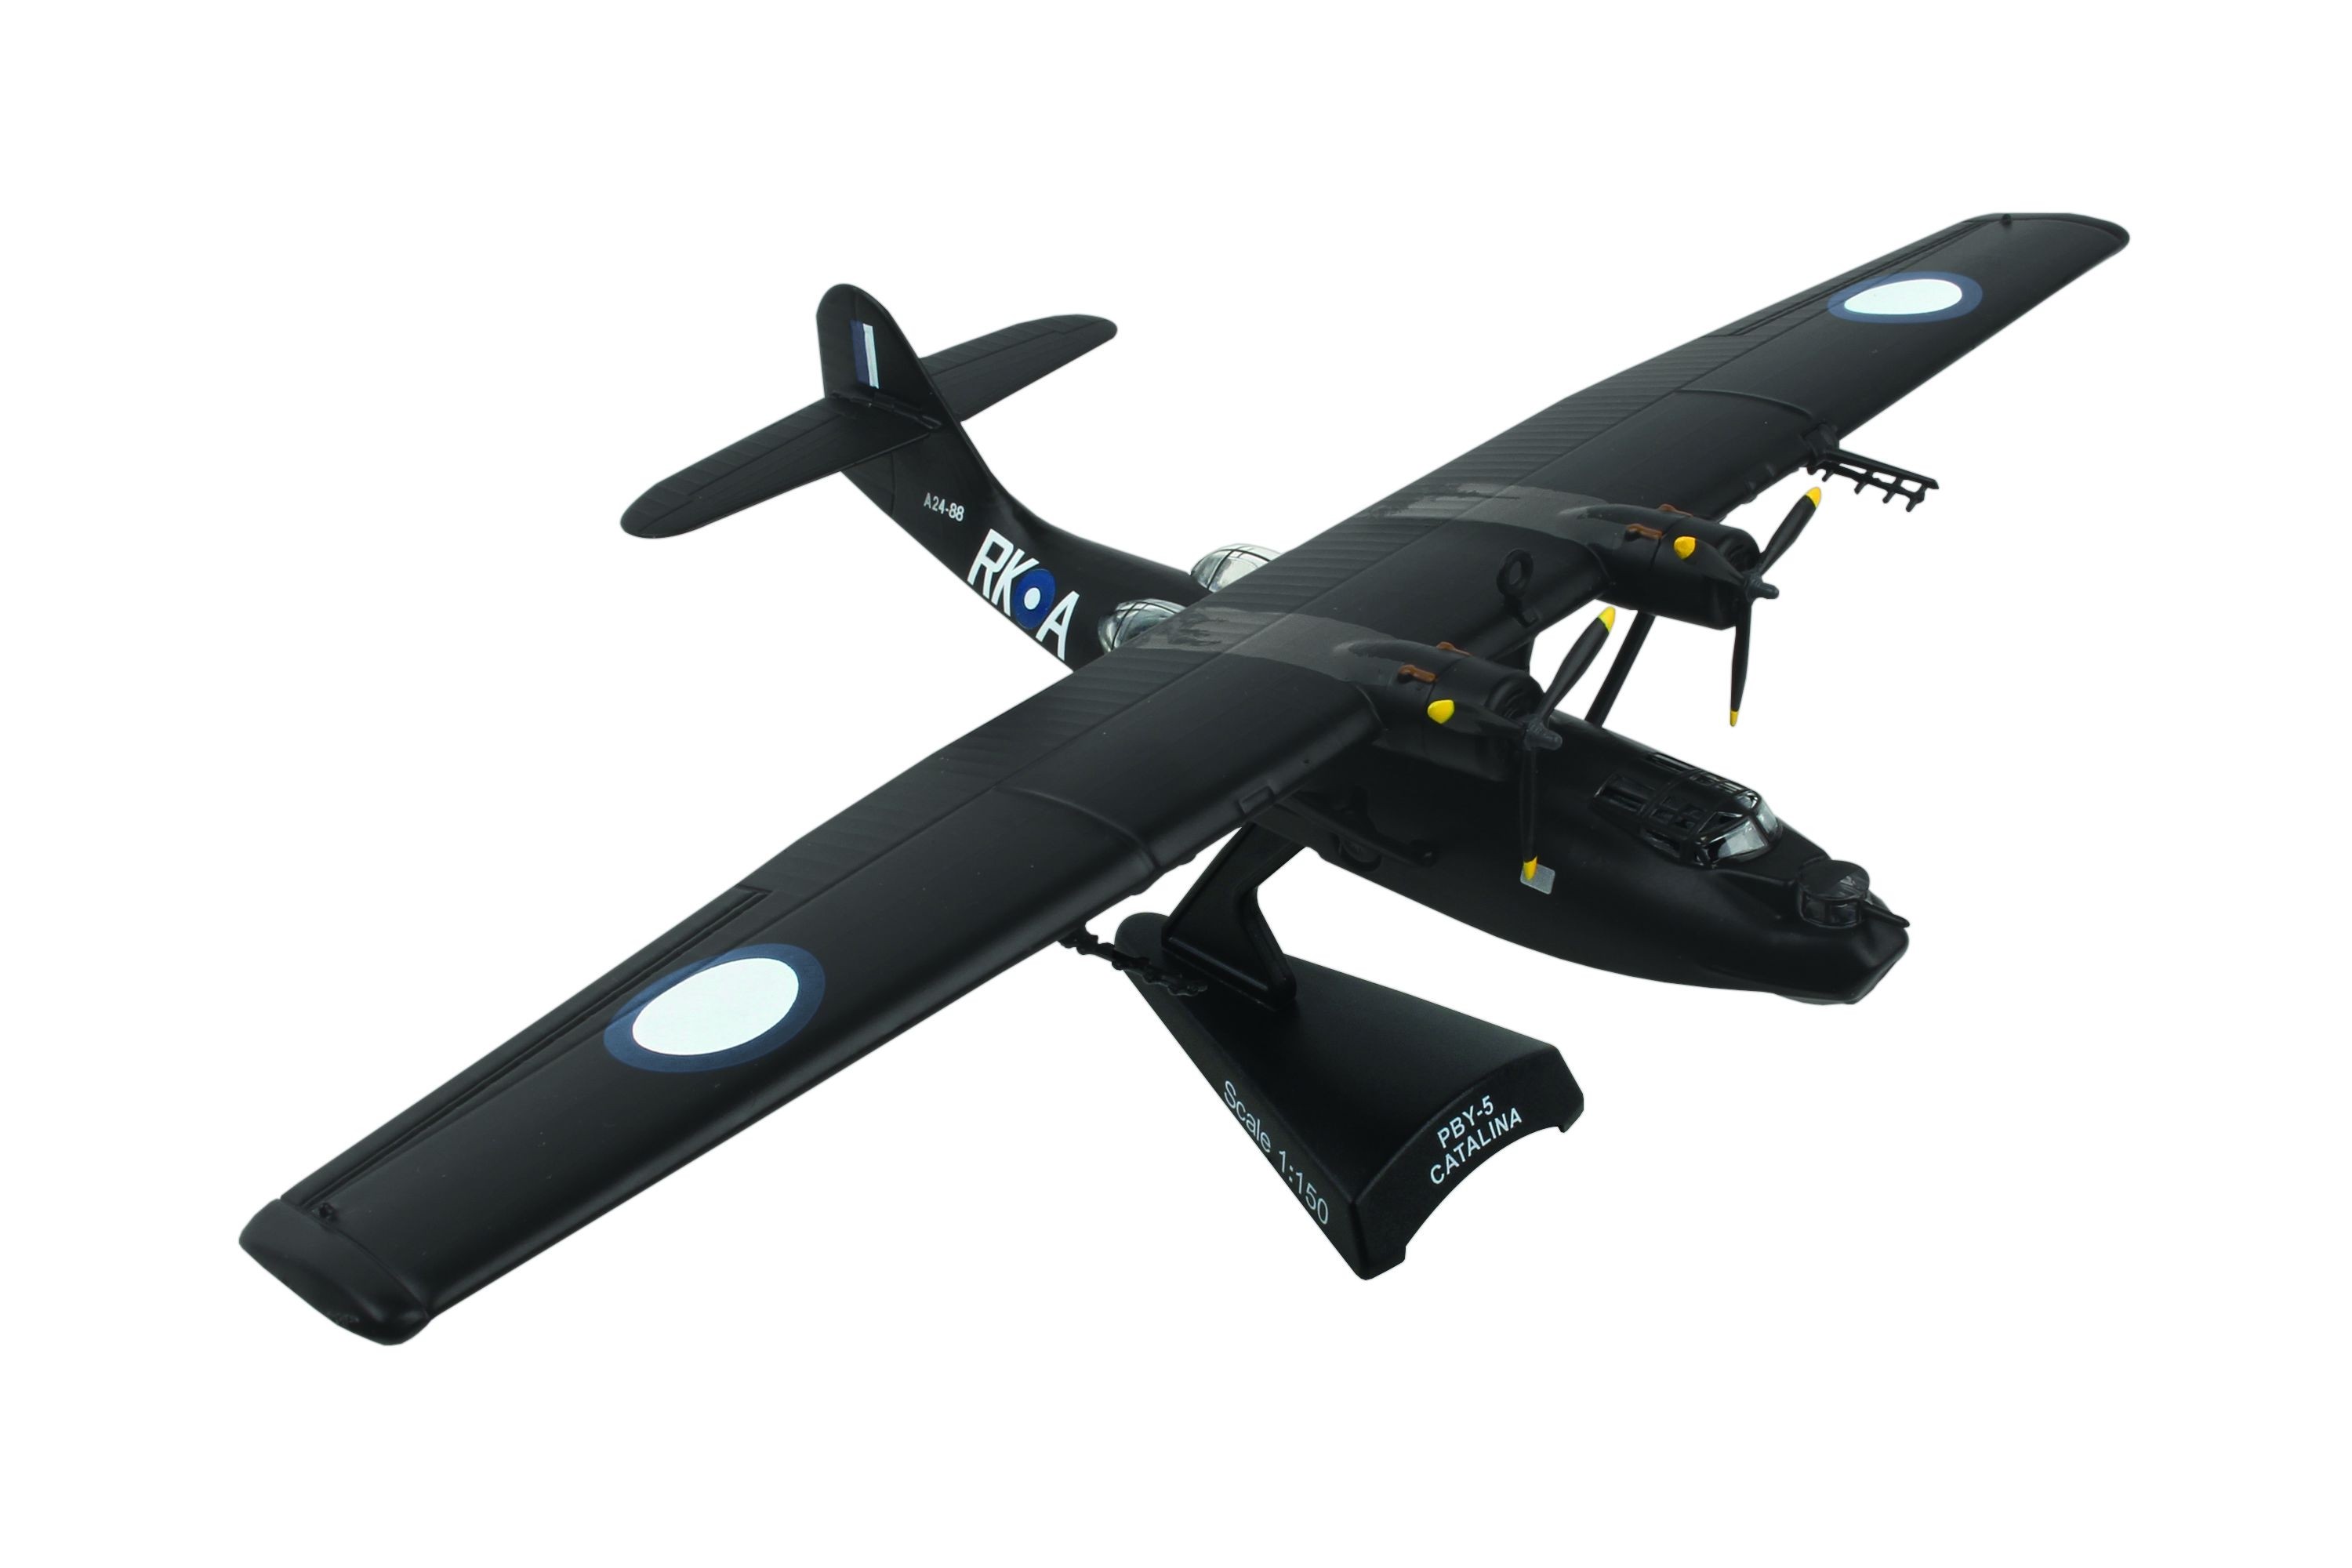 Details about   Postage Stamp PBY-5 USN Catalina RAAF Black Diecast Model Scale 1:150 